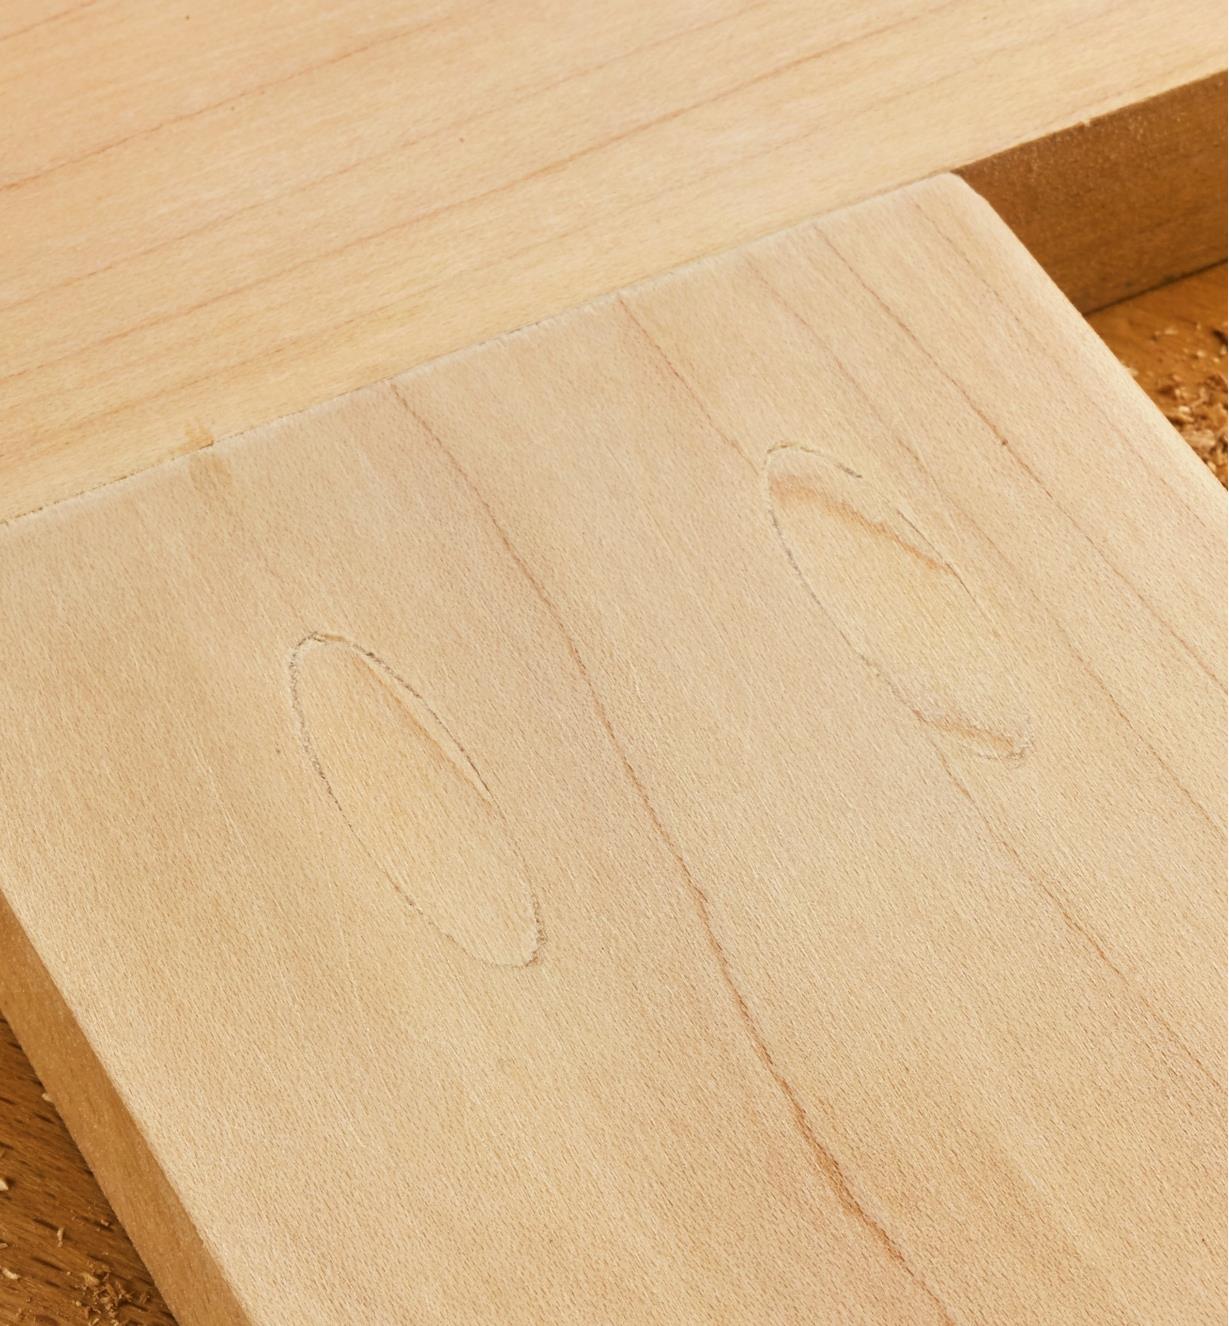 Wooden plugs cut with the Kreg 740 plug-cutter kit, inserted in two pocket holes and trimmed flush